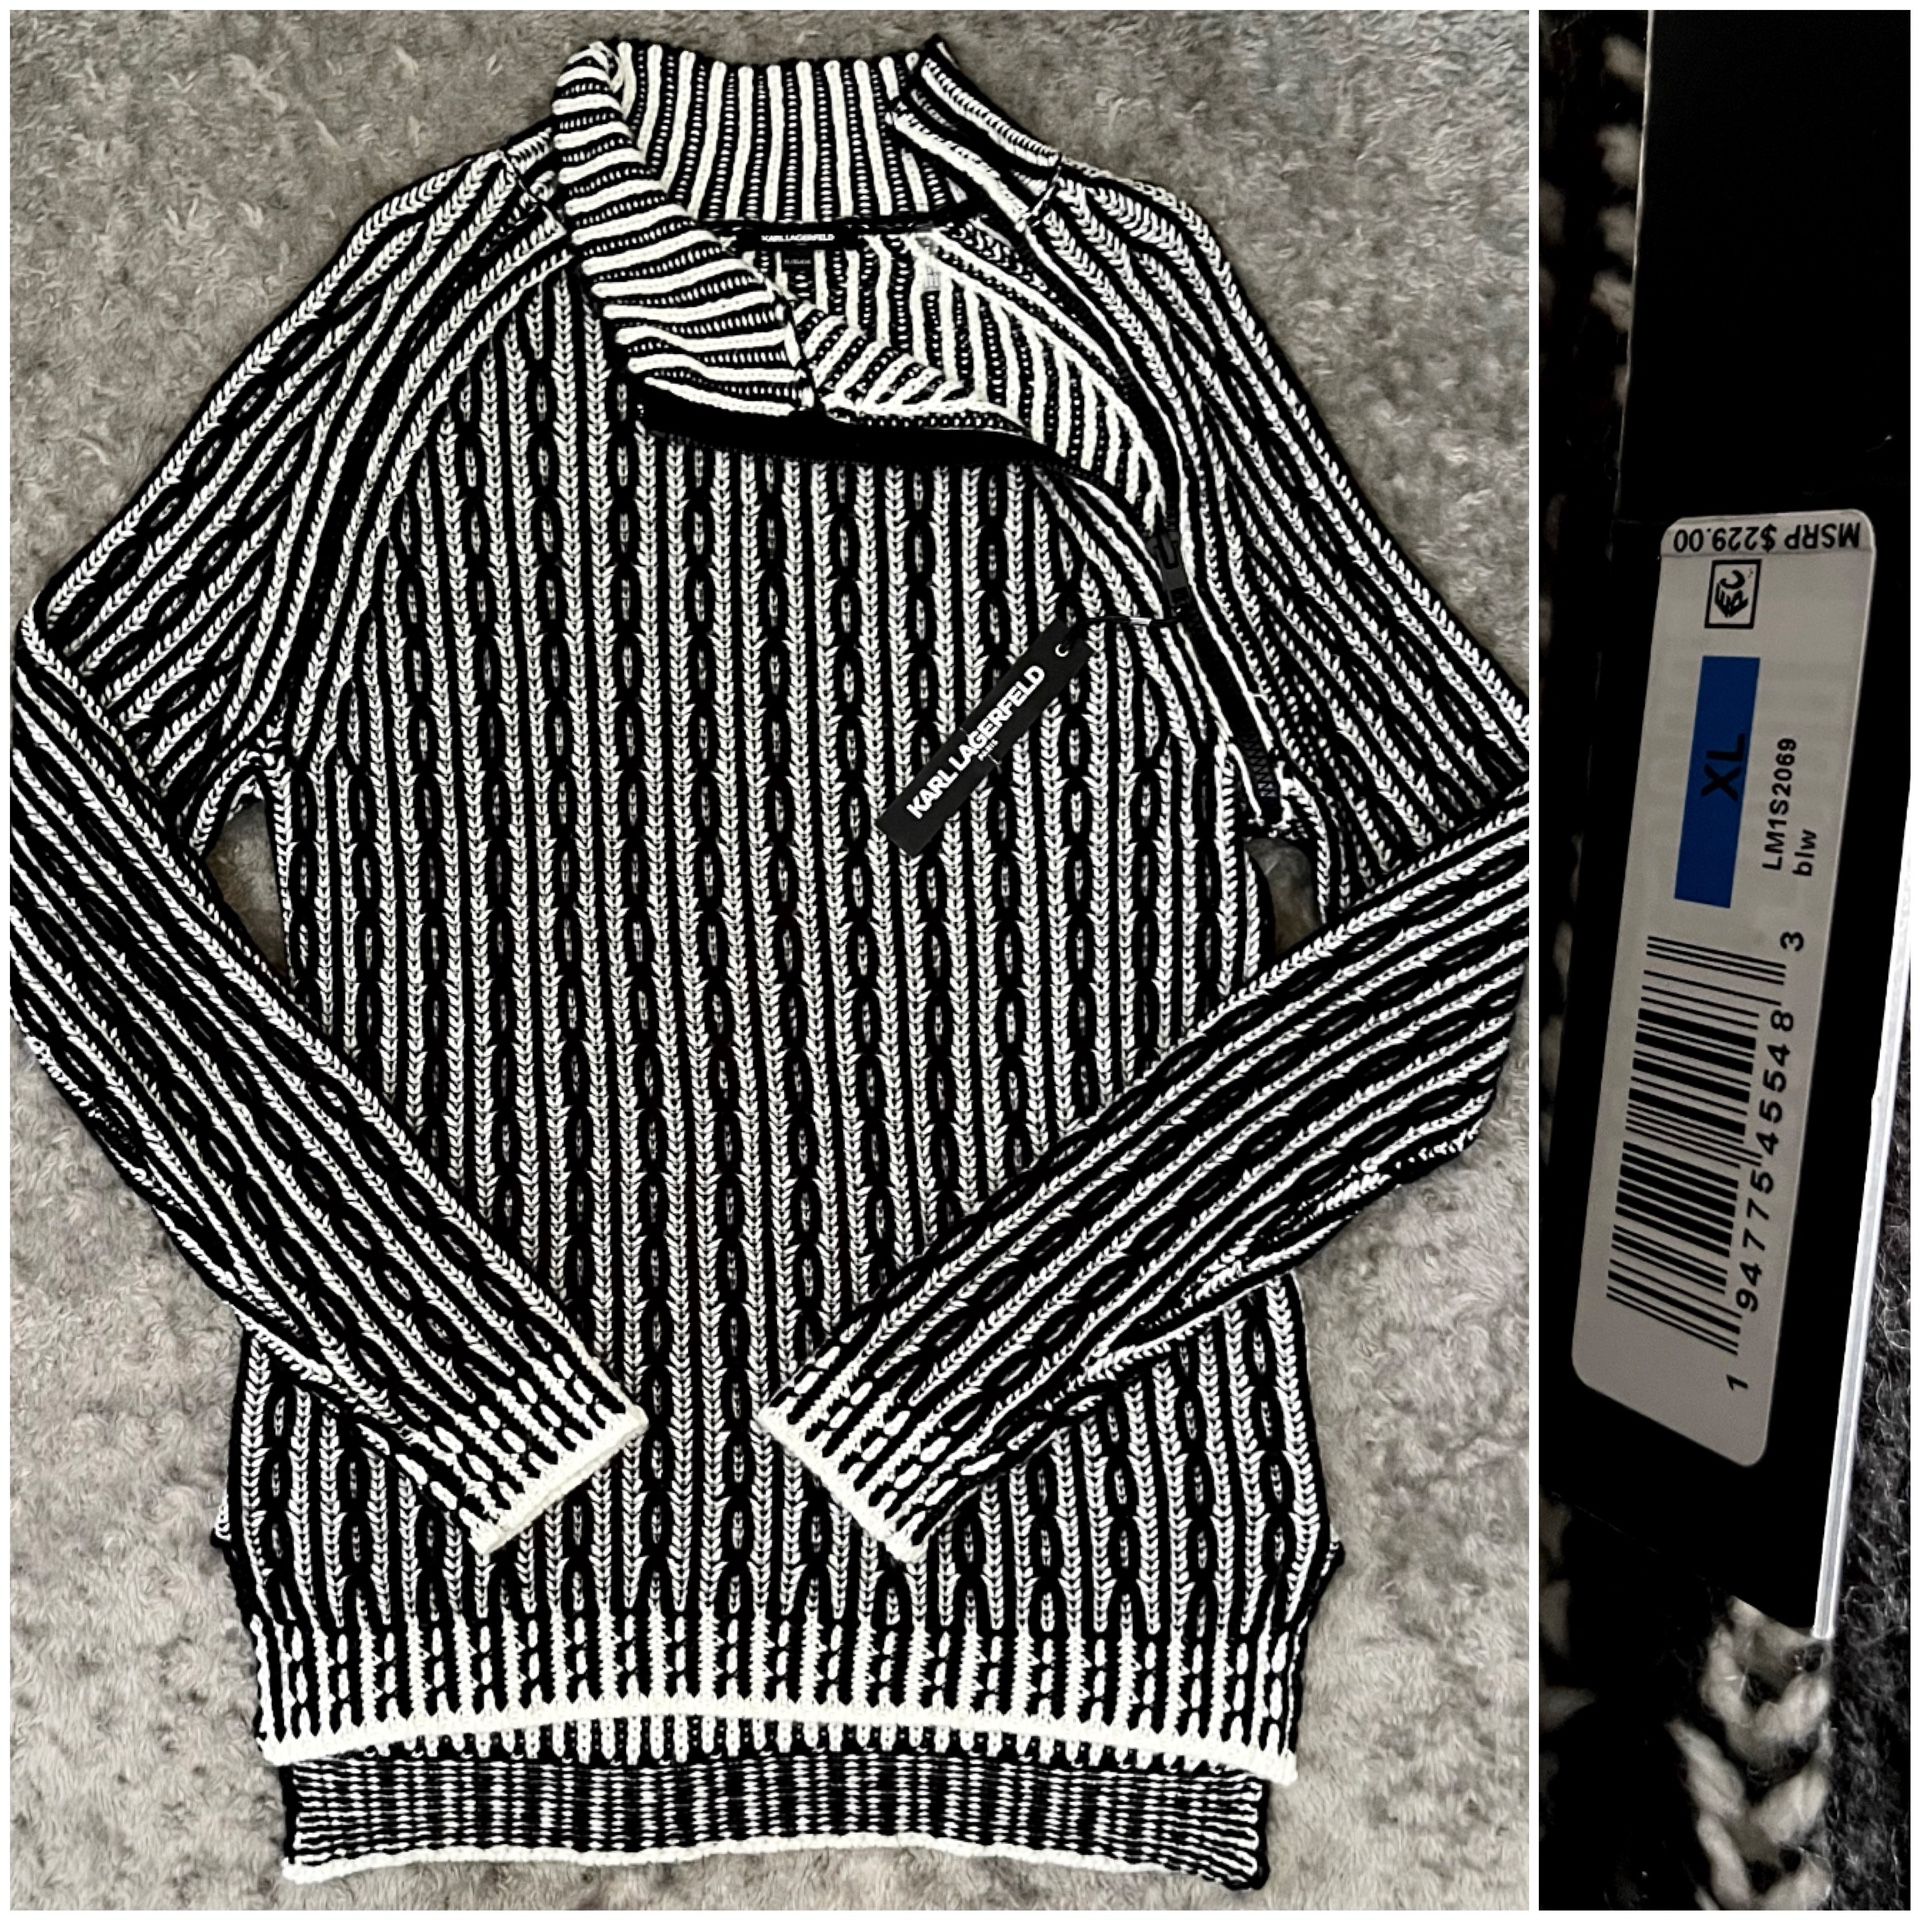 New! Men’s Karl Lagerfeld turtleneck with zipper detail. Size XL Retail $229 Brand new! Over-size turtleneck knit sweater with asymmetrical zipper det